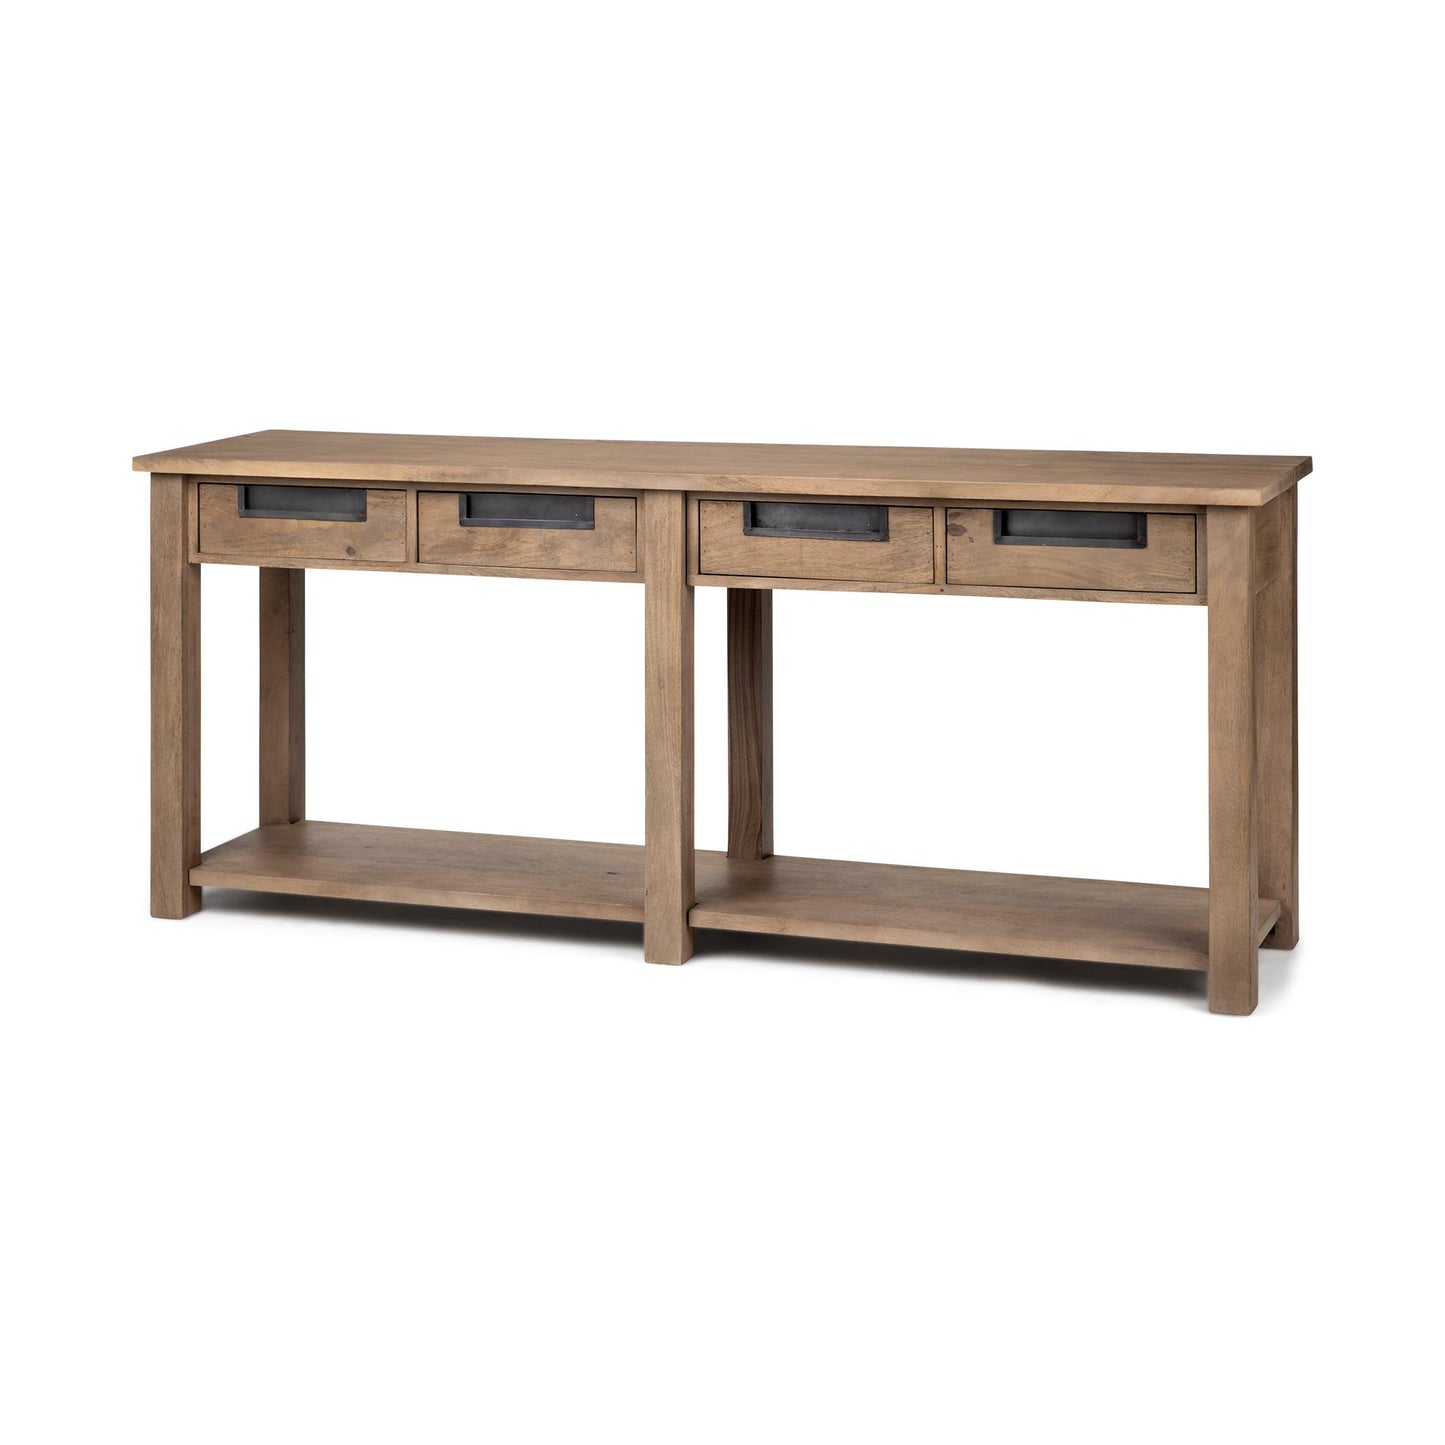 Harrelson III 72L x 18W Brown Wood 4 Drawer Console Table